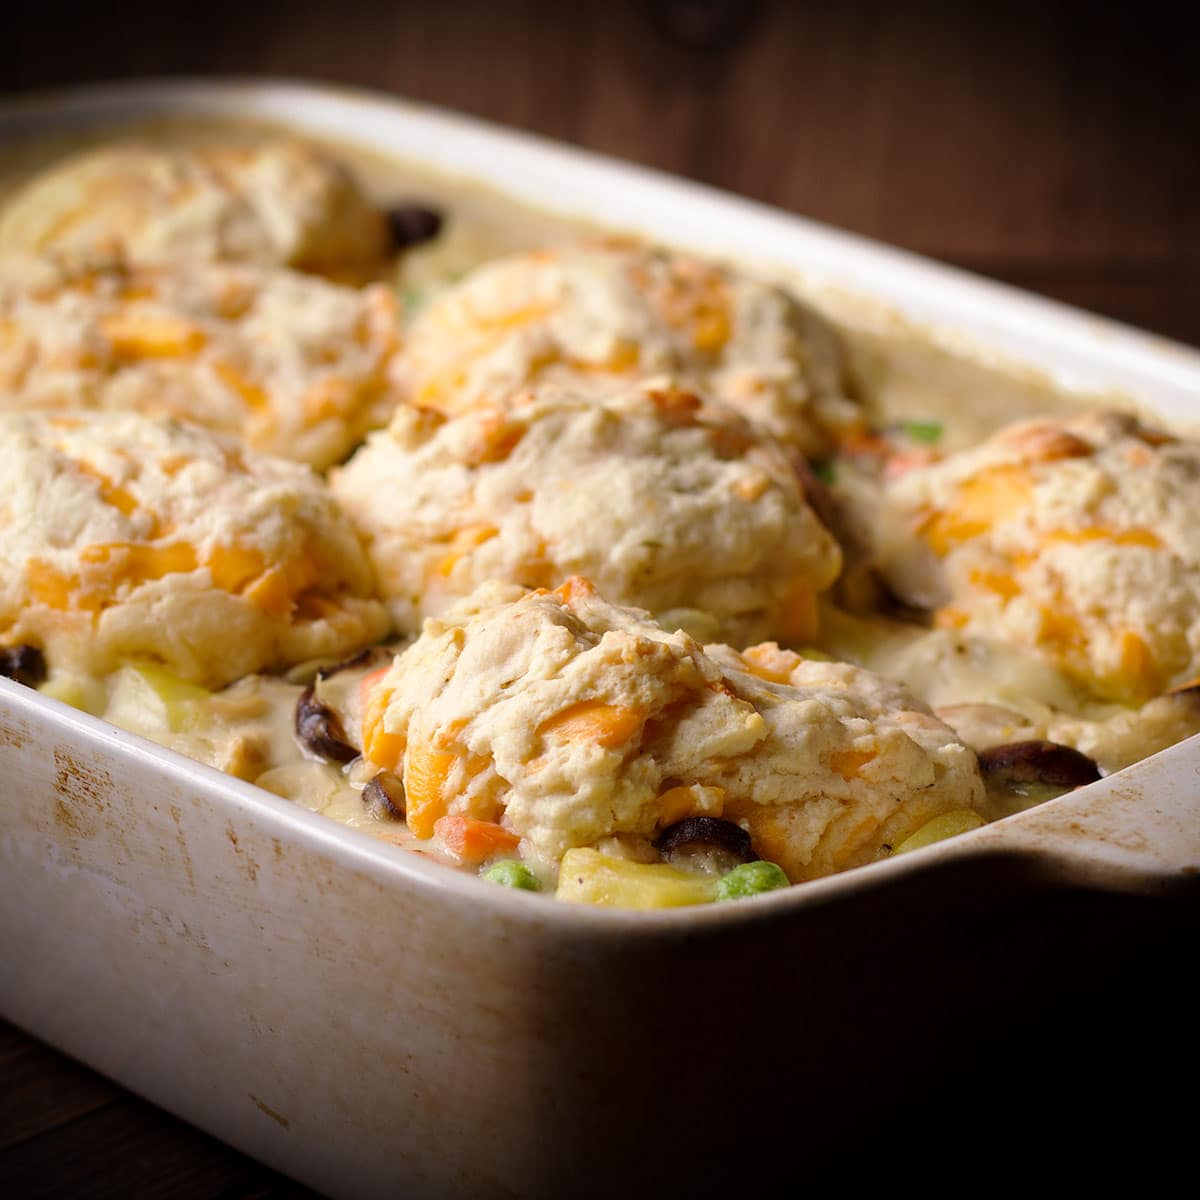 A biscuit topped turkey pot pie that's been baked in a rectangle casserole dish.